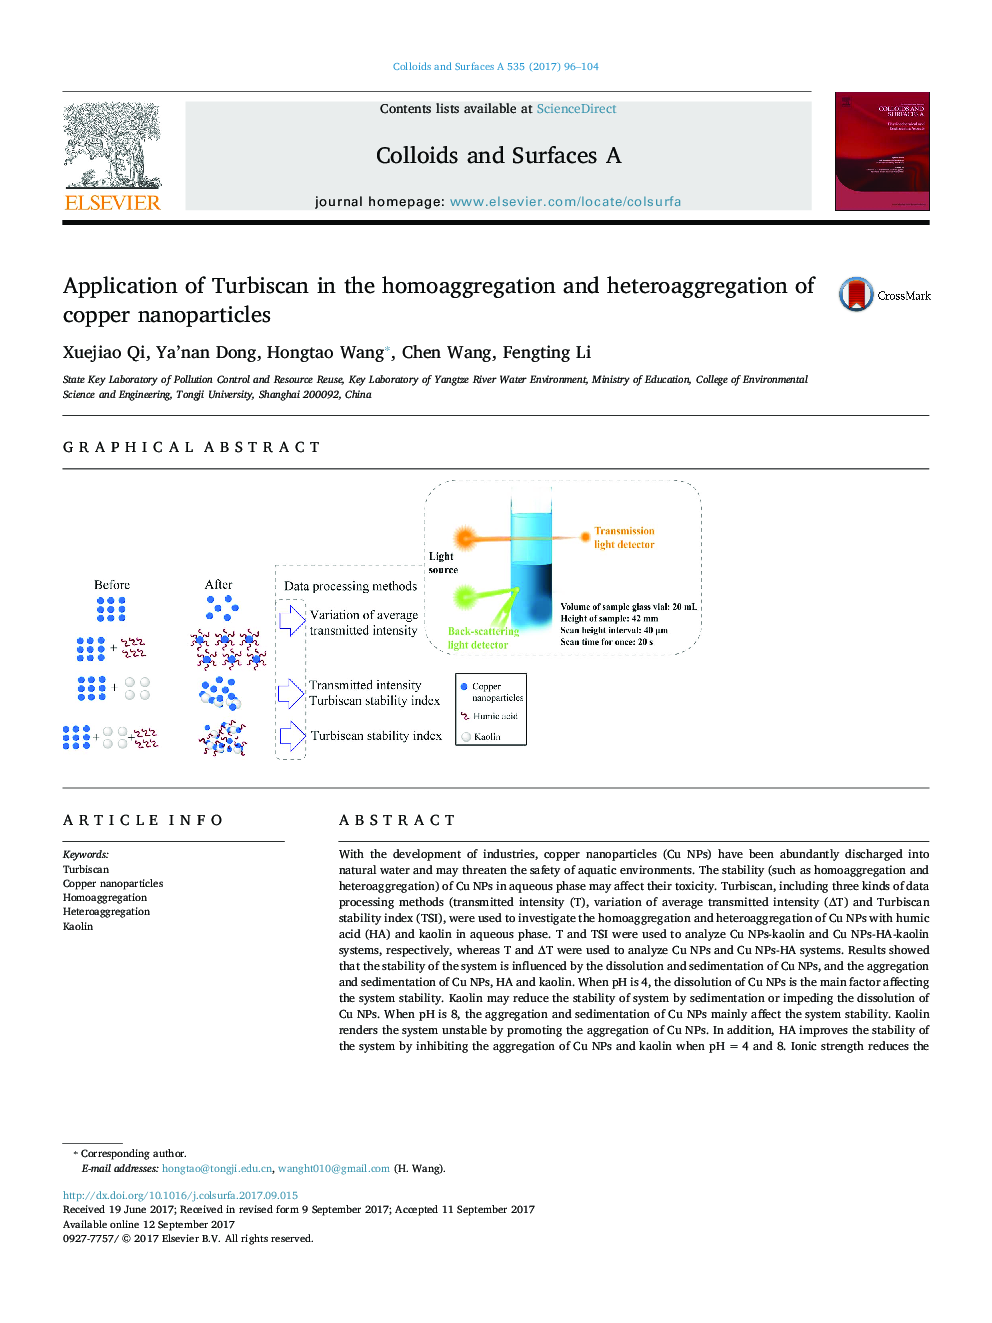 Application of Turbiscan in the homoaggregation and heteroaggregation of copper nanoparticles